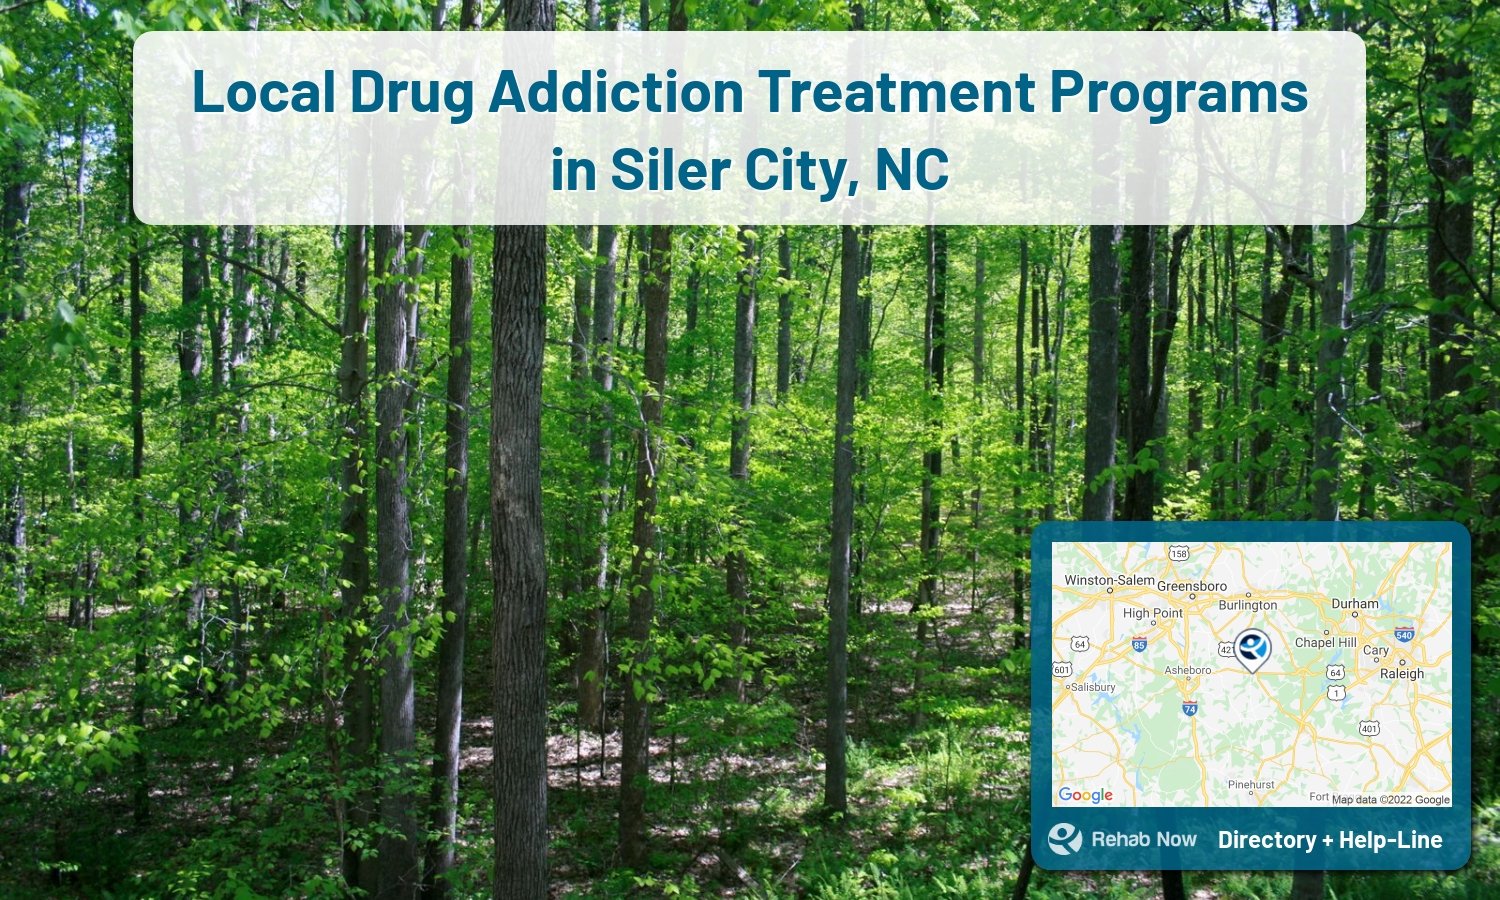 List of alcohol and drug treatment centers near you in Siler City, North Carolina. Research certifications, programs, methods, pricing, and more.